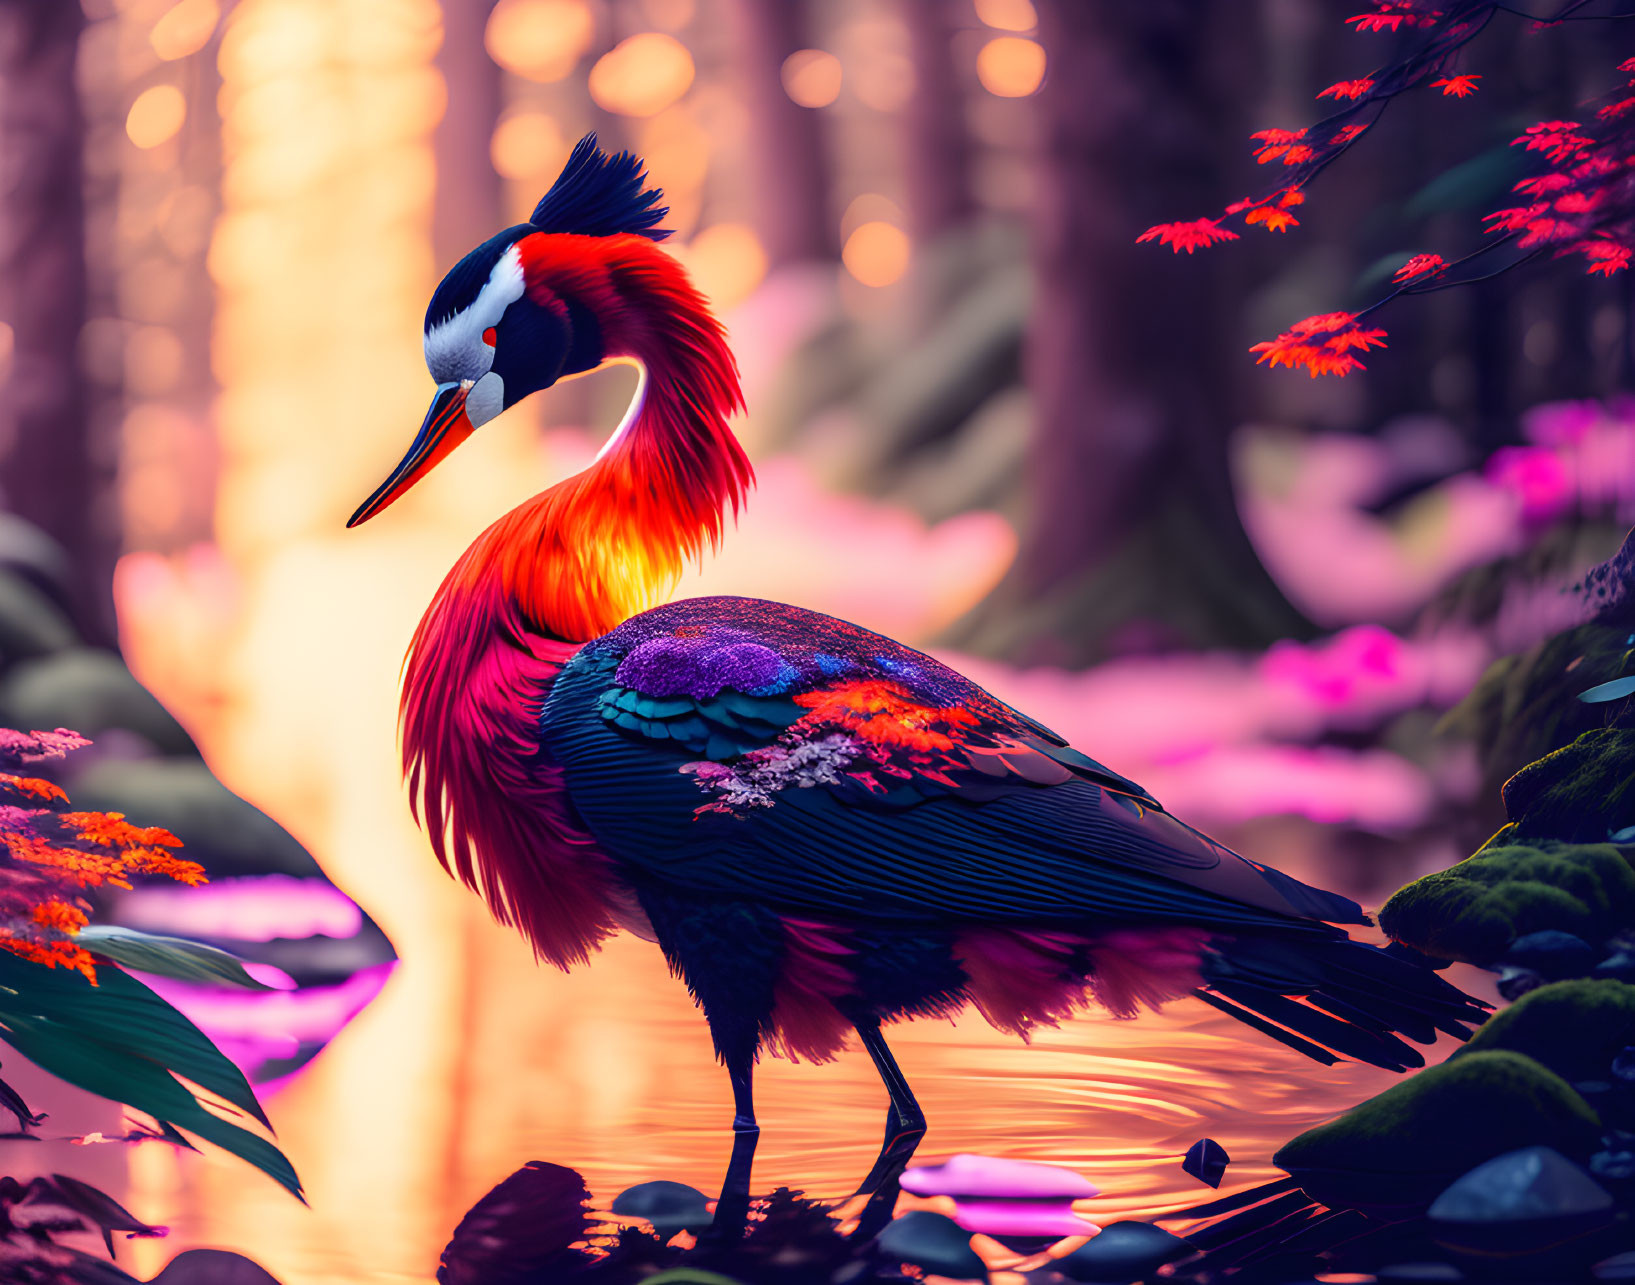 Colorful Bird with Orange, Black, and Blue Plumage in Nature Scene